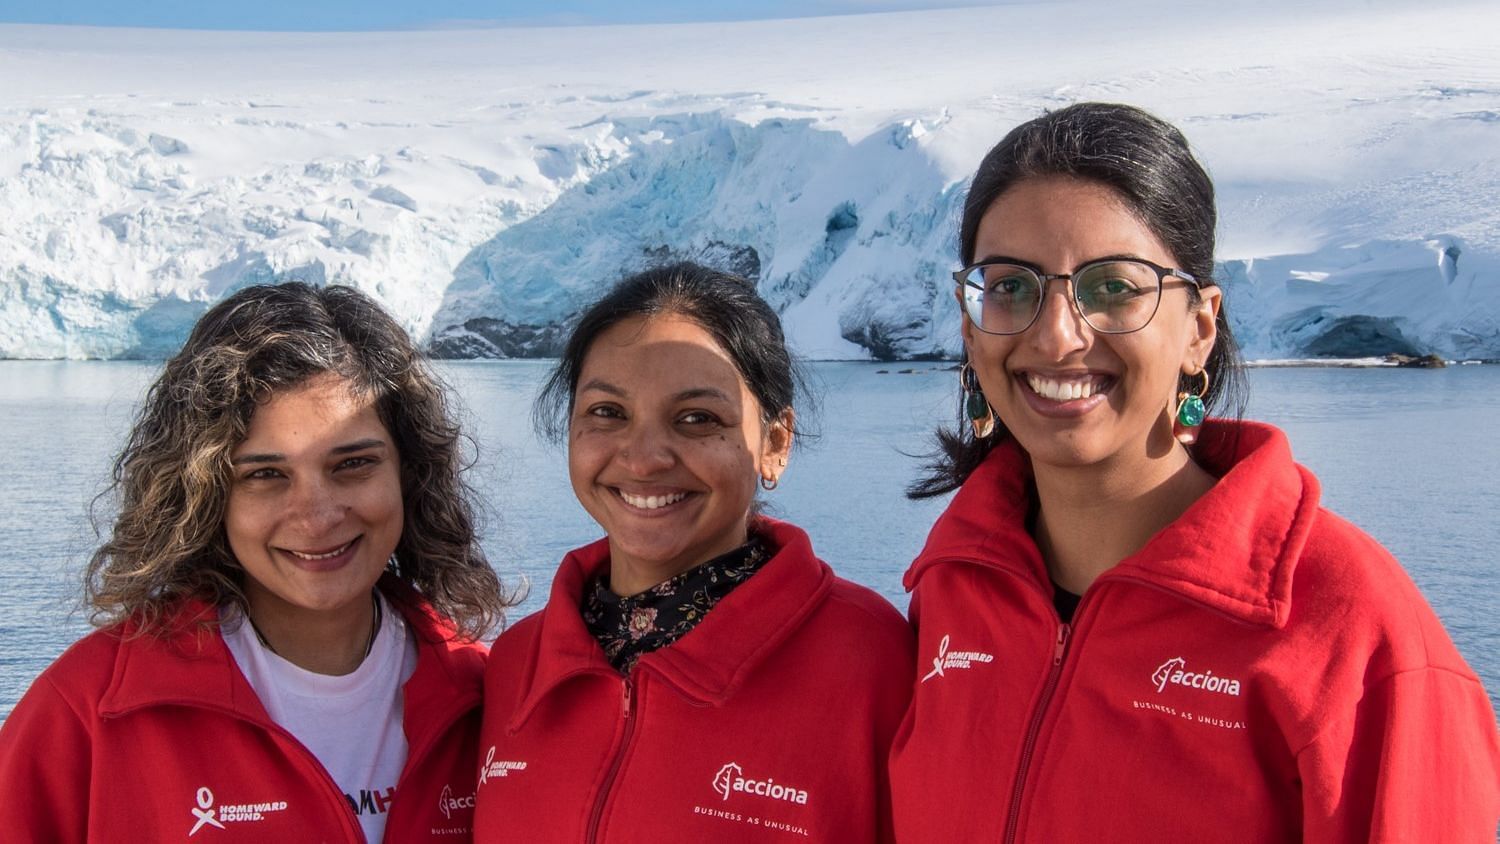 An ecologist, an astronomer &amp; a practicing medicinal doctor: Meet the Indian-origin women on a voyage to Antarctica.